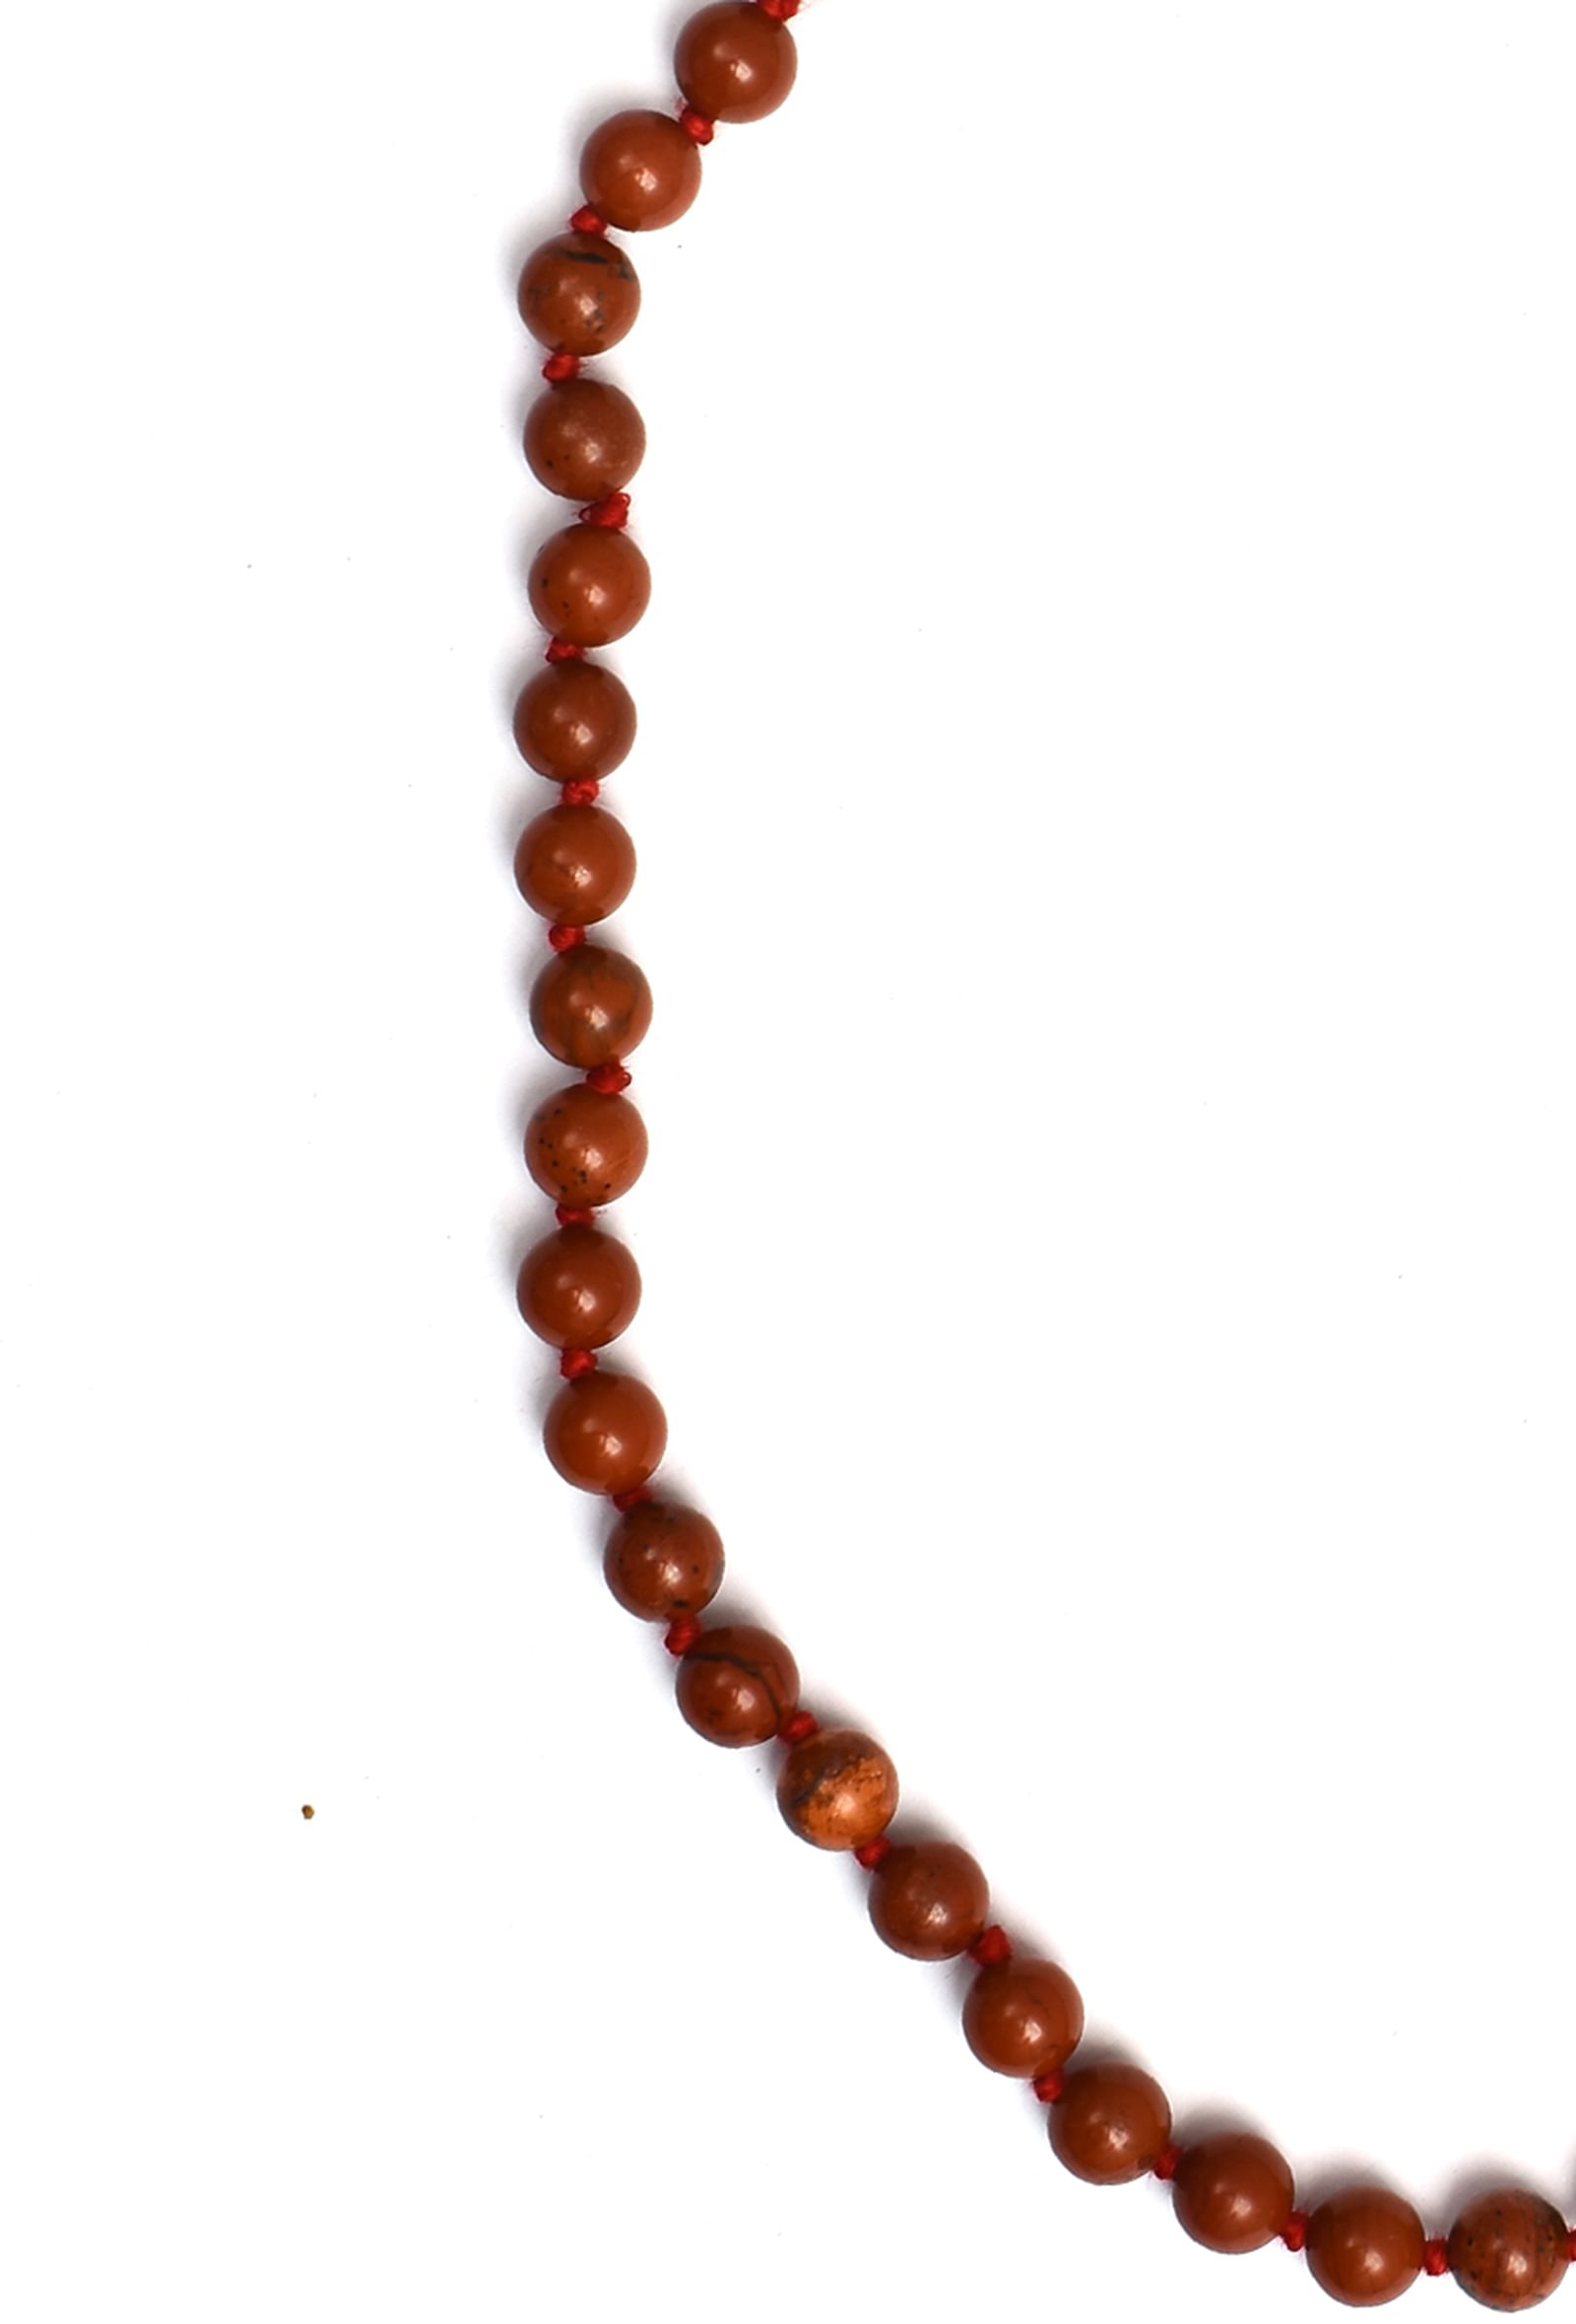 Coral Red Lava Chanting Beads